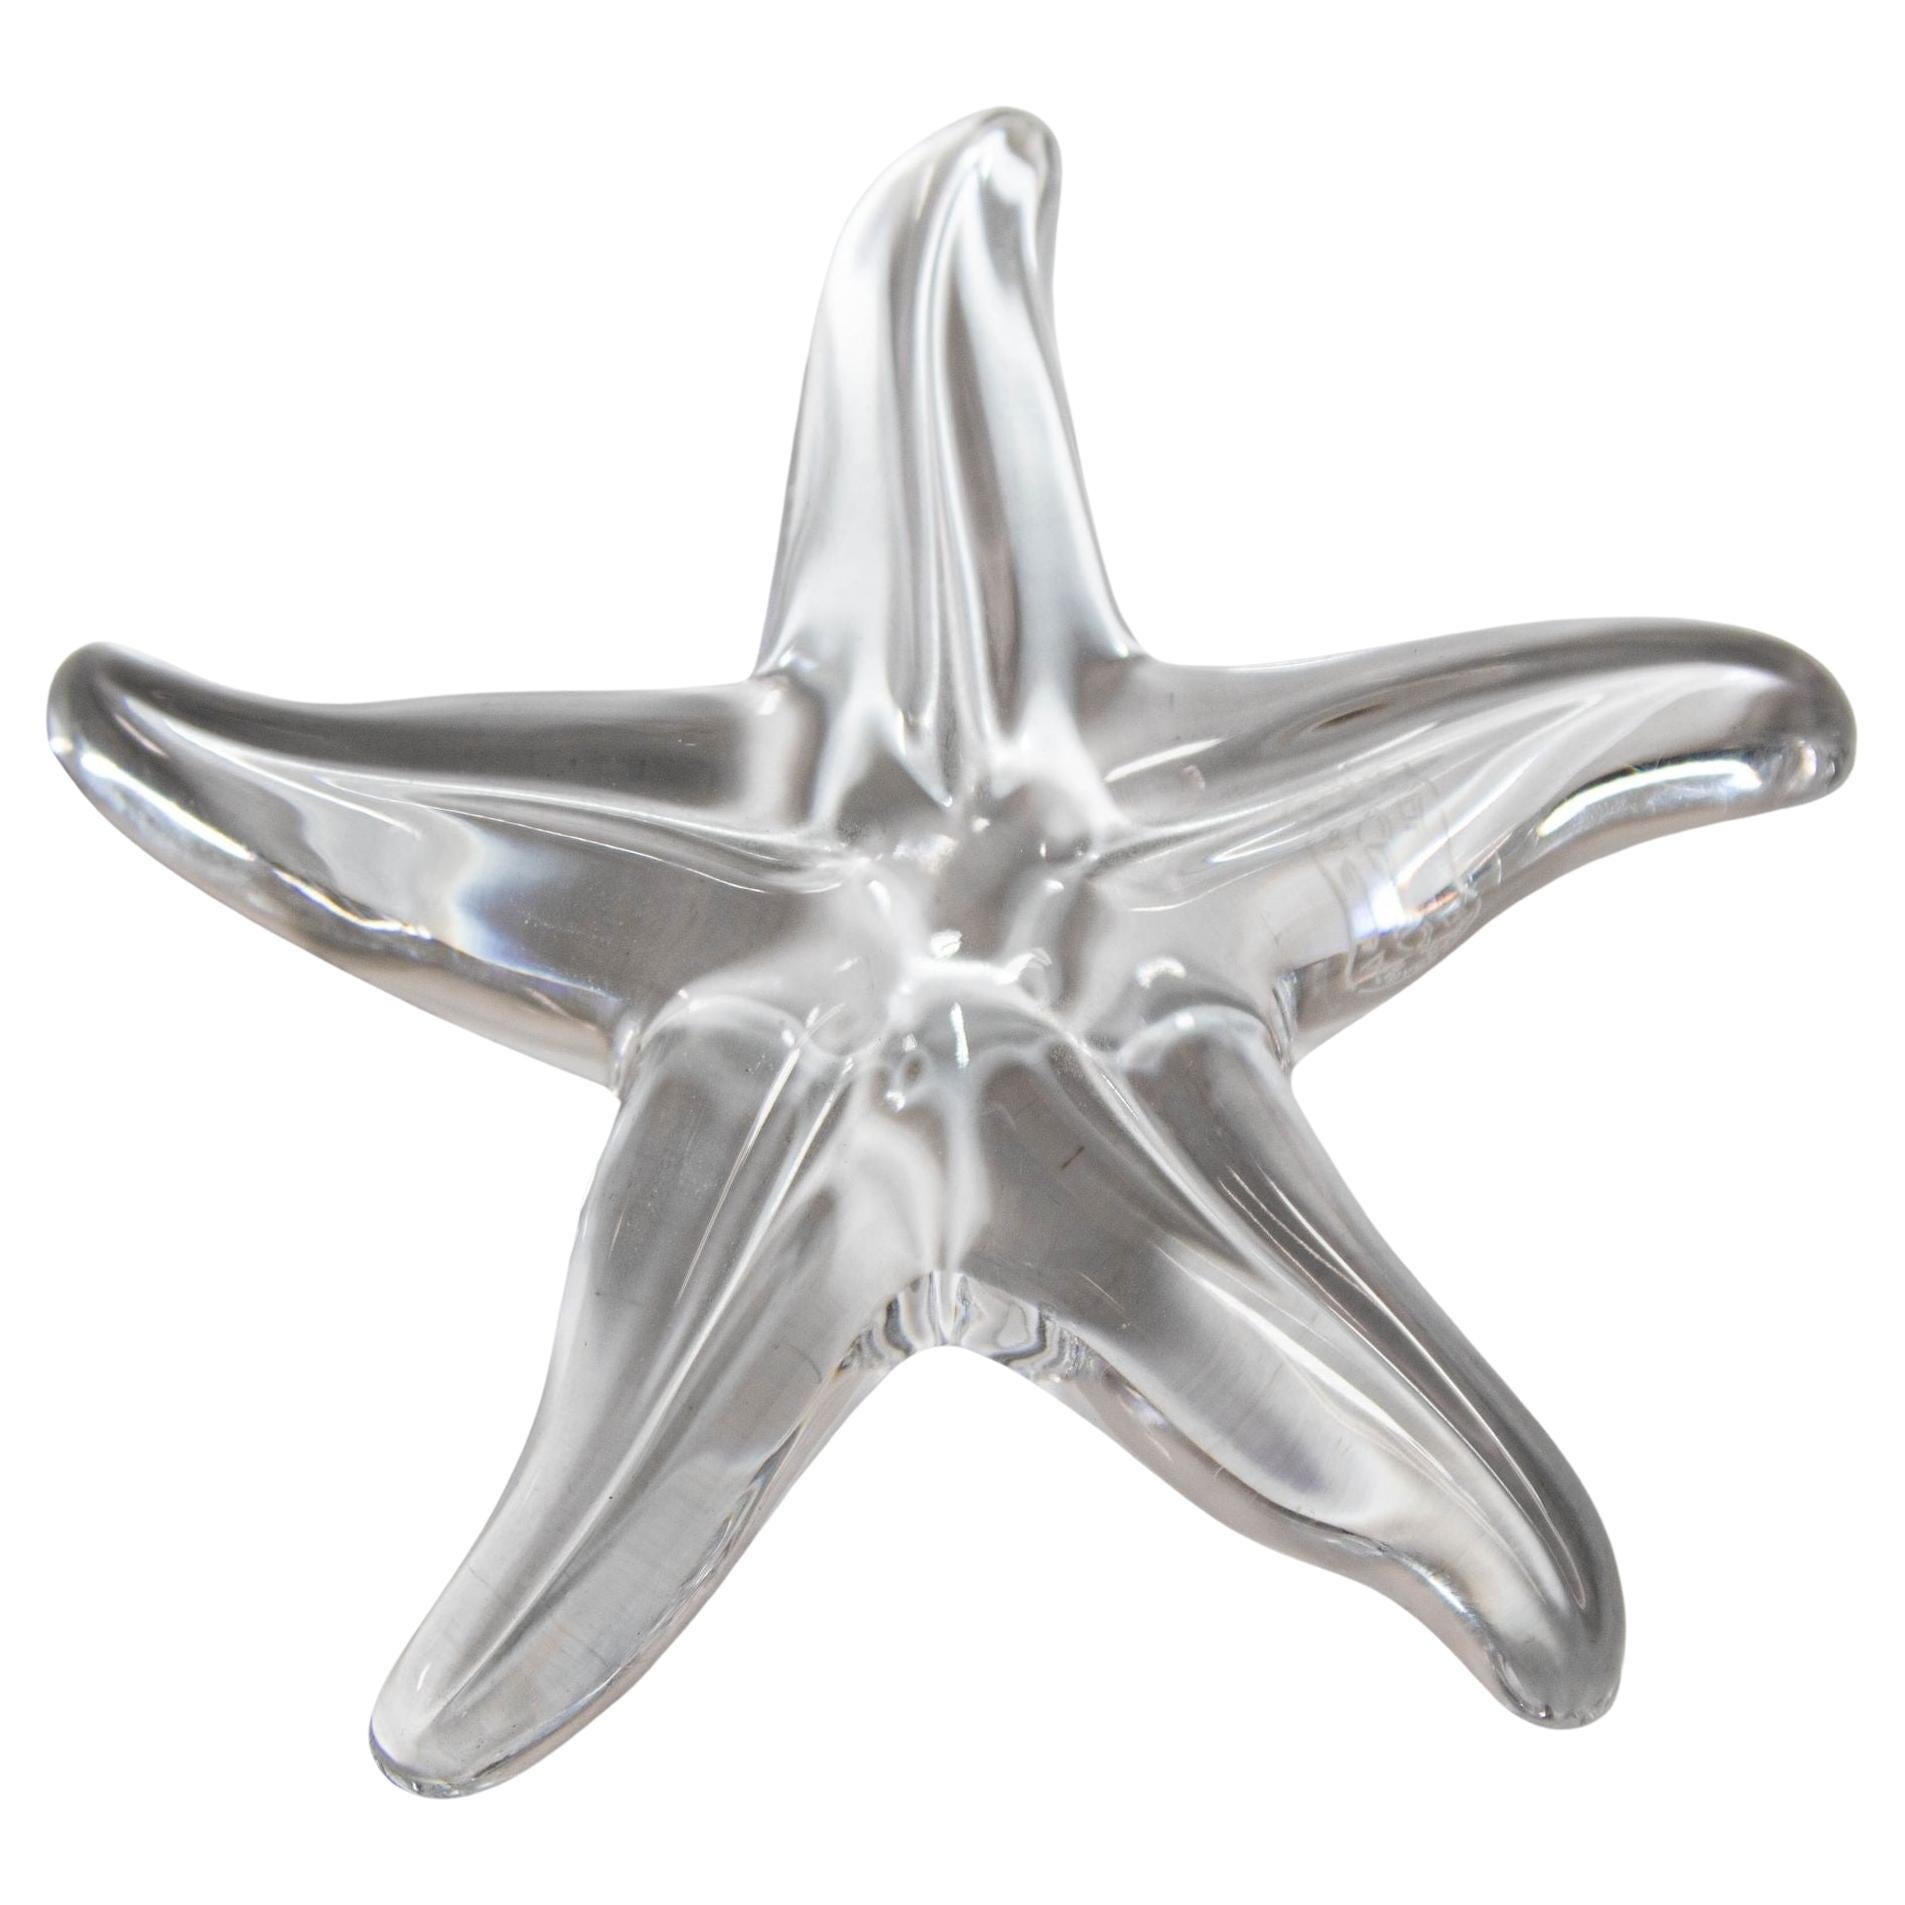 BACCARAT France Crystal Starfish Paperweight Art Glass 1970s For Sale